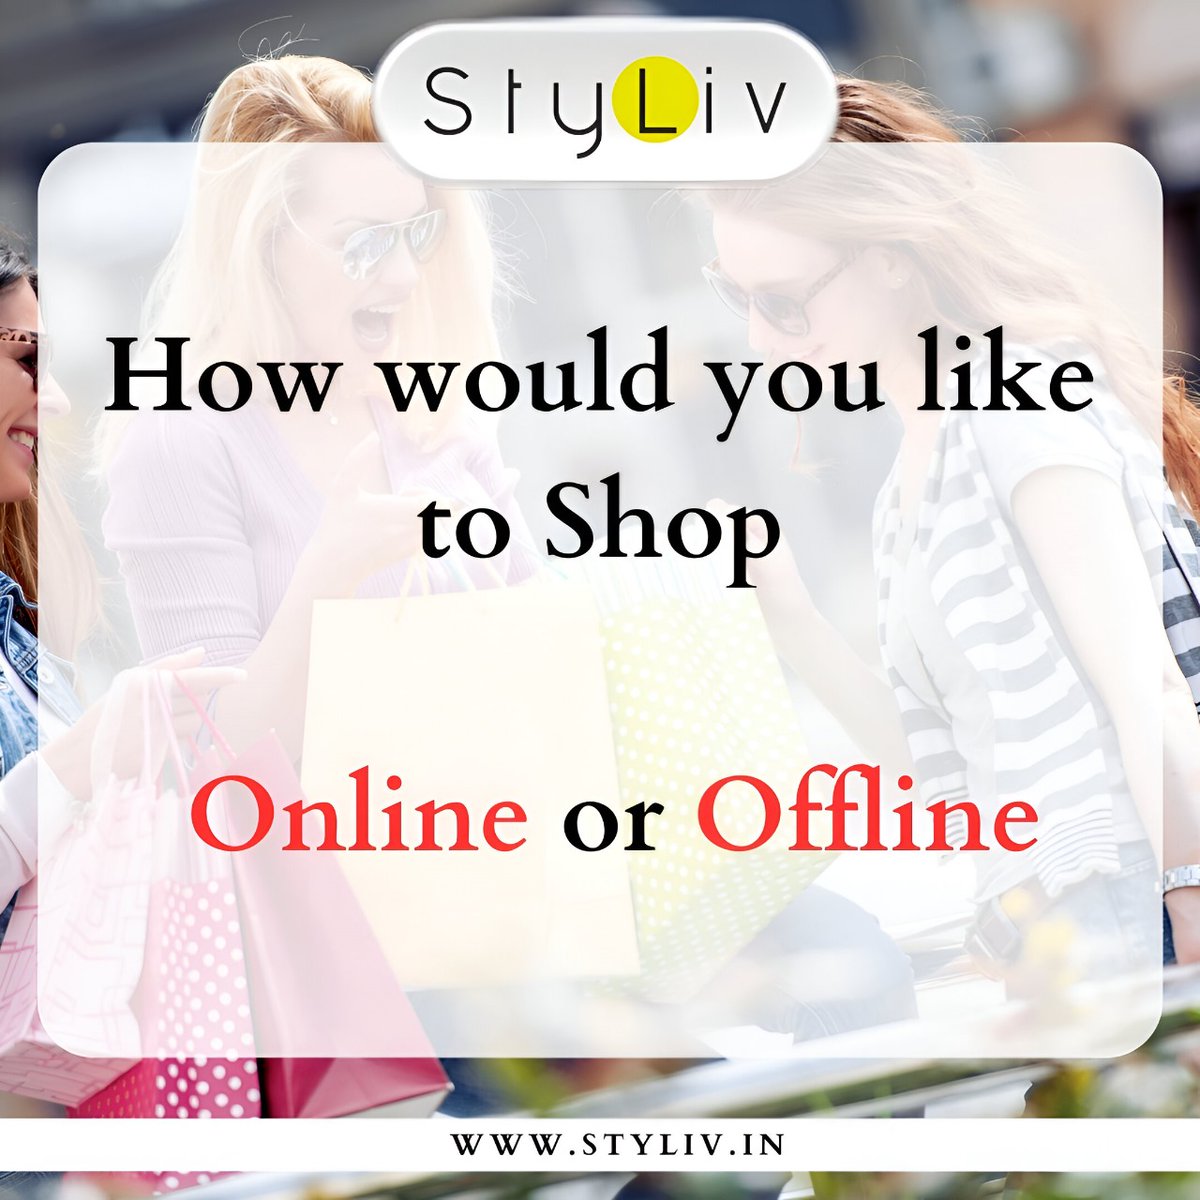 🛍️ How would you like to shop: online or offline?

Drop your answer in the comment box below! ⬇️

#OnlineShopping #OfflineShopping #RetailTherapy #ShopTillYouDrop #Ecommerce #BrickAndMortar #VirtualShopping #InStoreExperience #ShoppingExperience #OnlineVsOffline